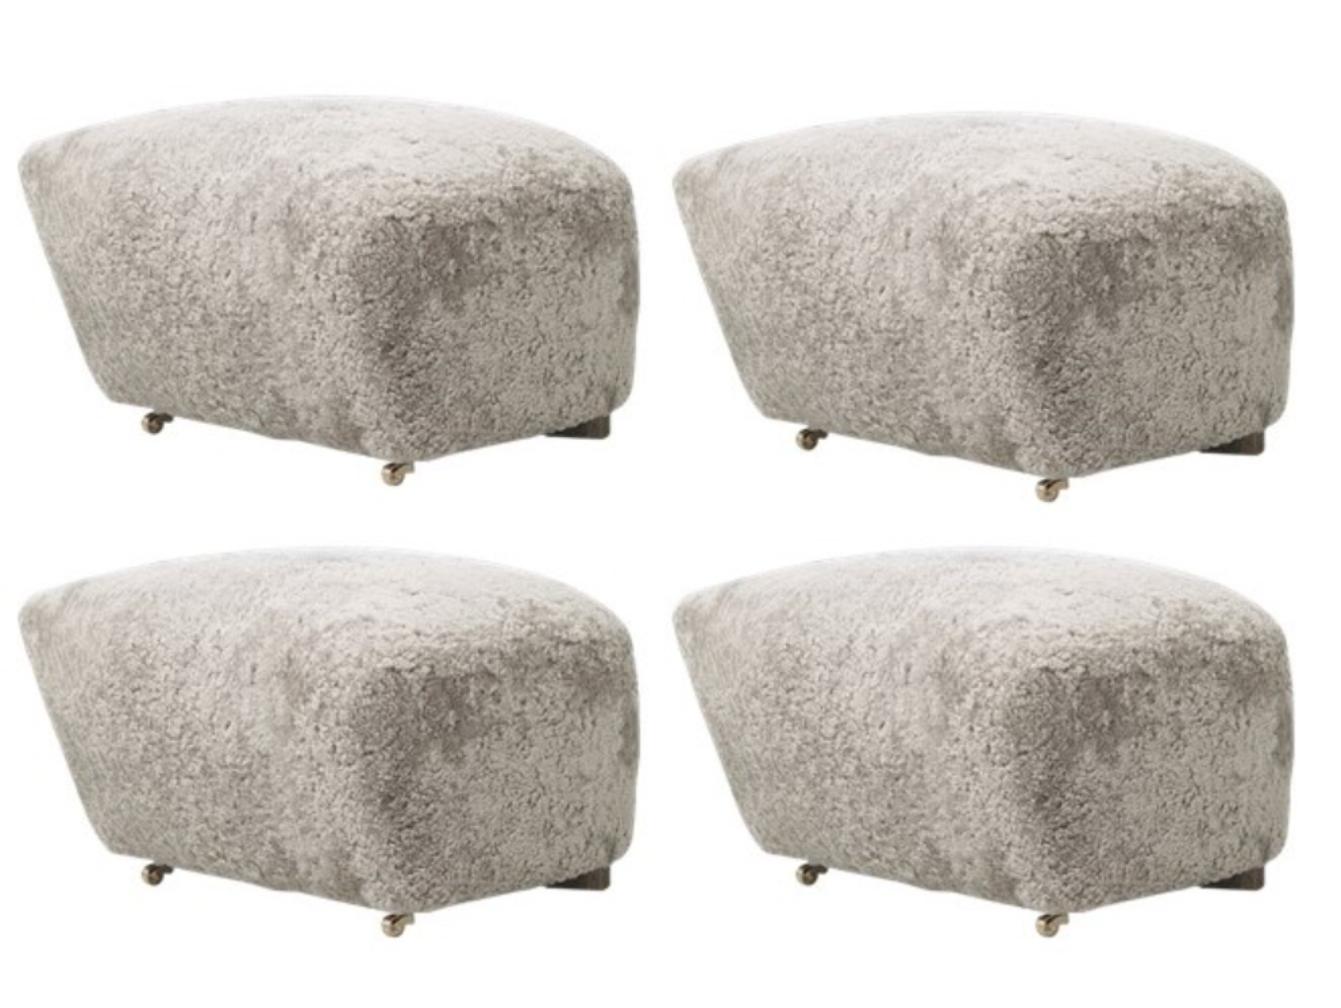 Set Of 4 green tea smoked oak sheepskin the tired man footstools by Lassen.
Dimensions: W 55 x D 53 x H 36 cm 
Materials: Sheepskin

Flemming Lassen designed the overstuffed easy chair, the tired man, for the copenhagen cabinetmakers’ guild